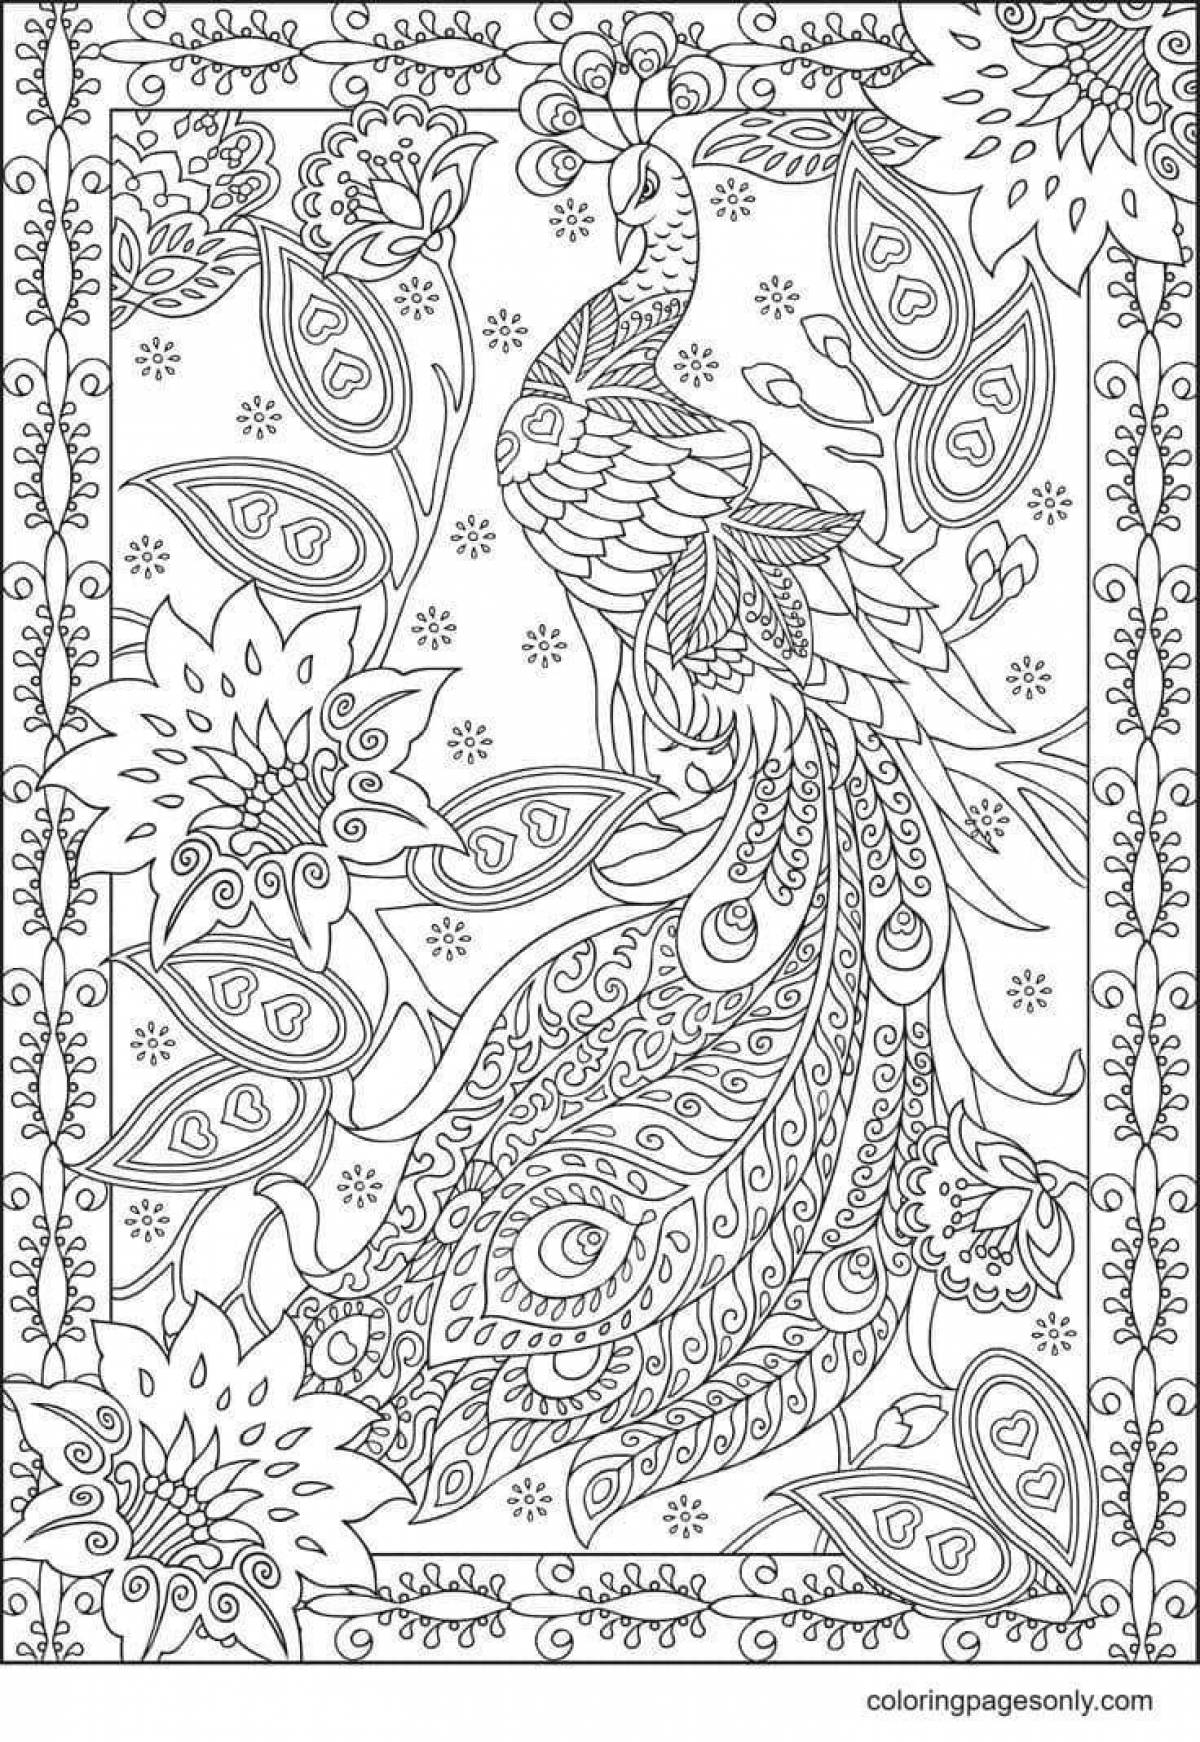 Great coloring pages for adults